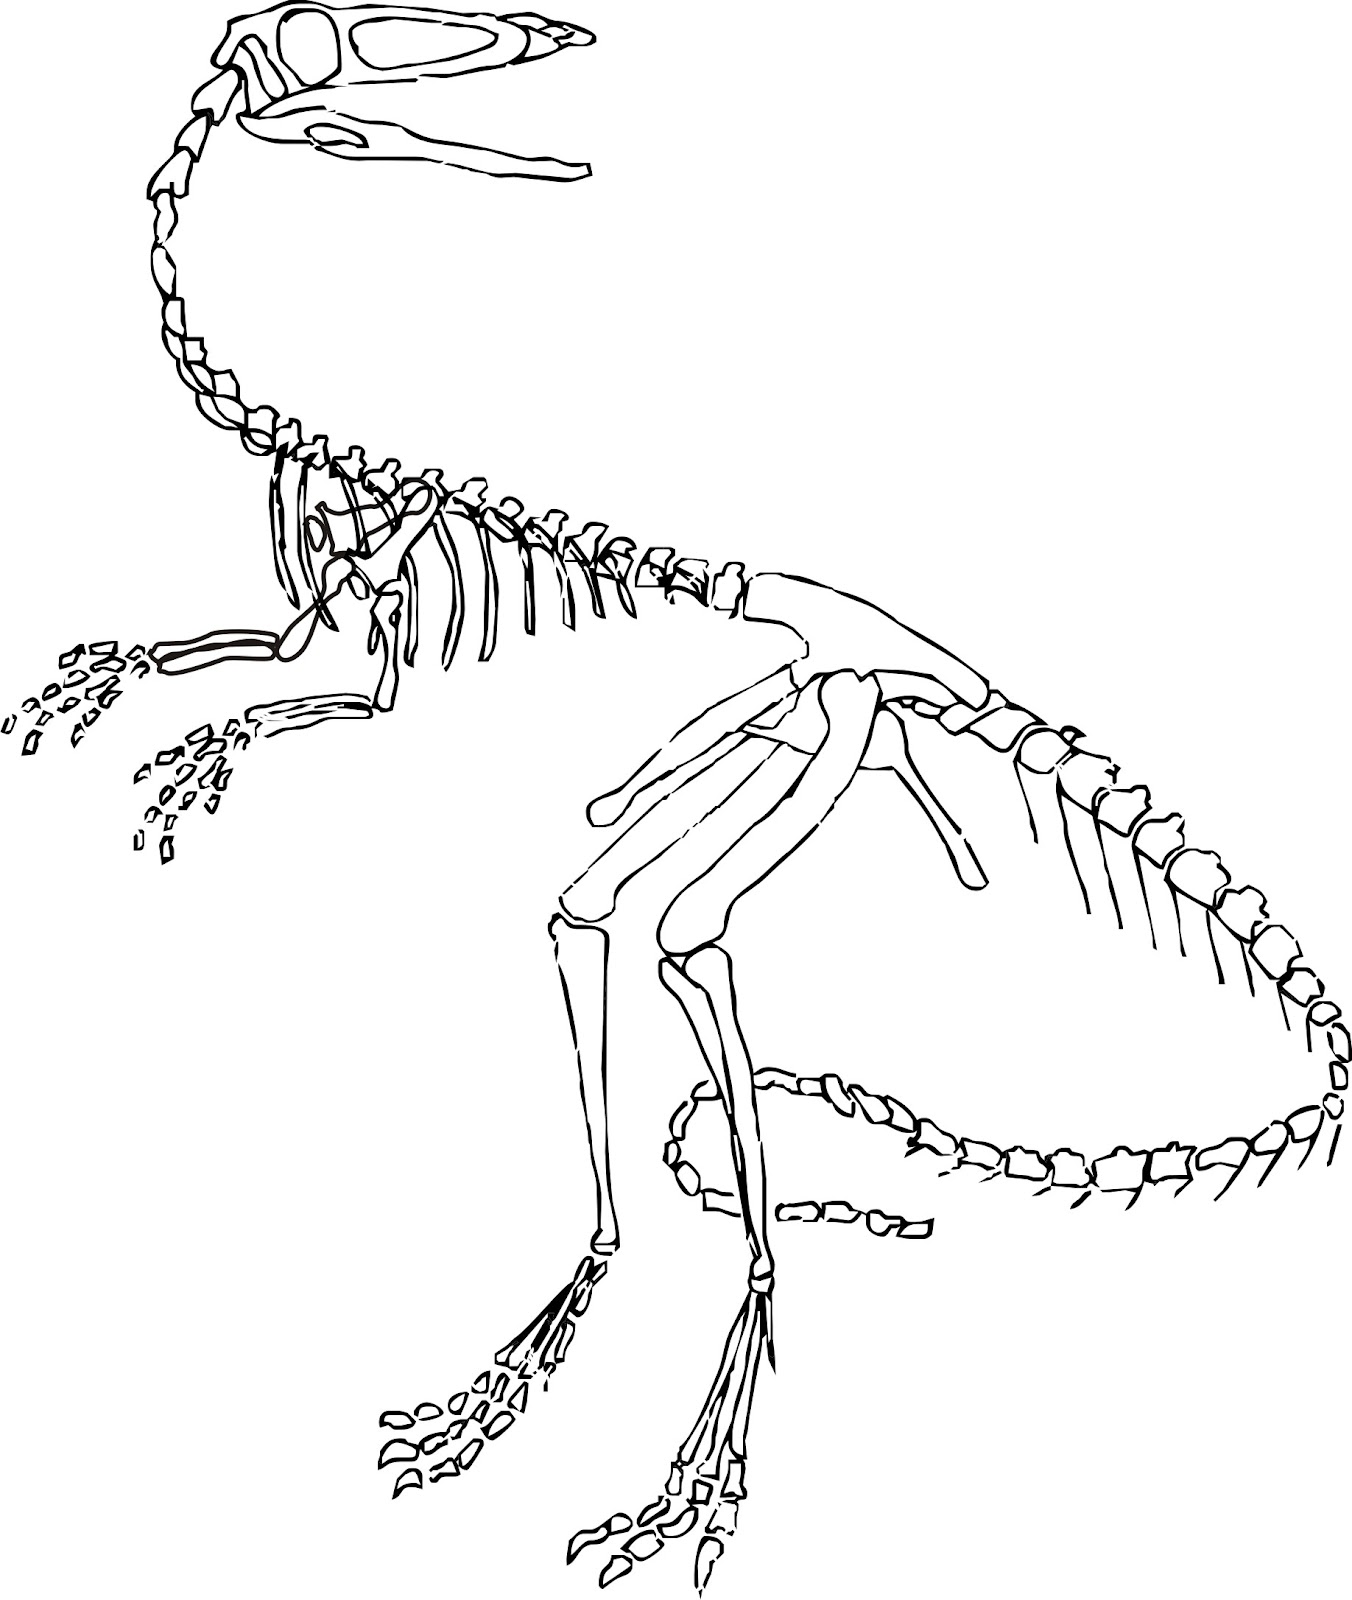 Download Velociraptor dinosaur skeleton coloring page - Dinosaurs Pictures and Facts